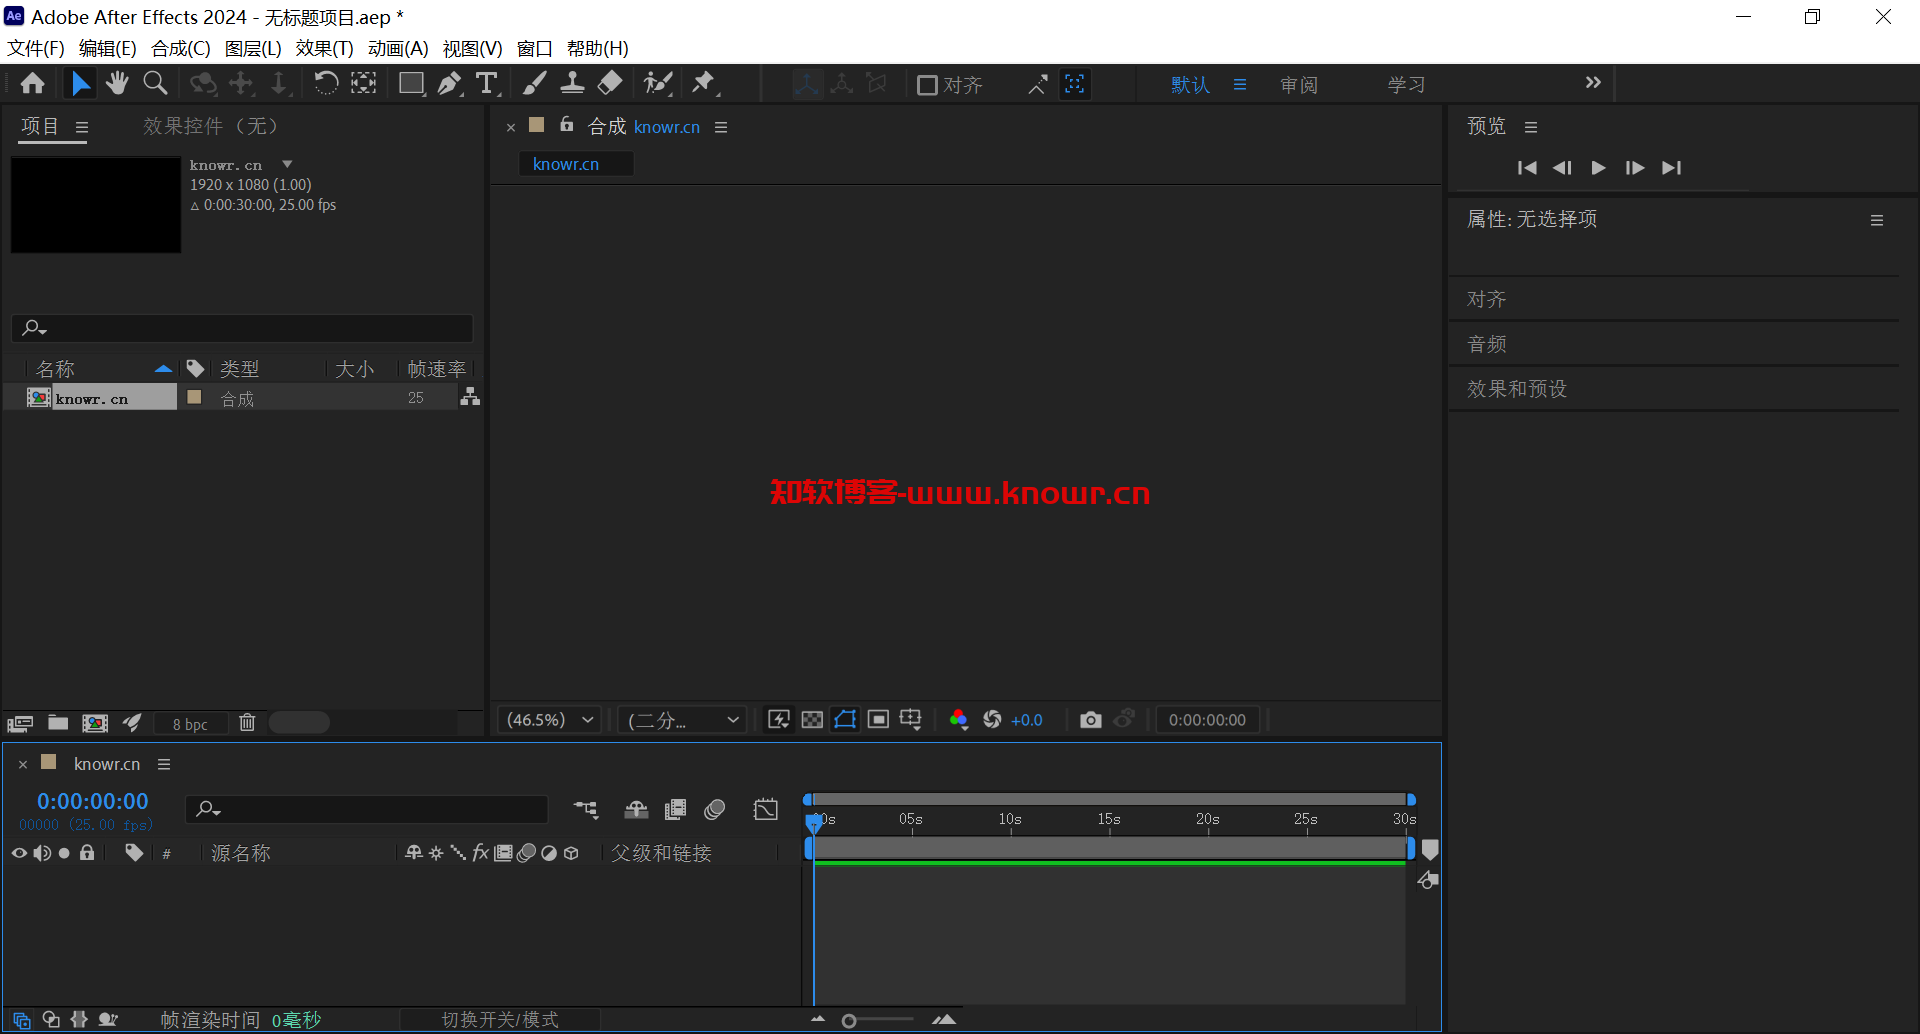 Adobe After Effects 破解版.png